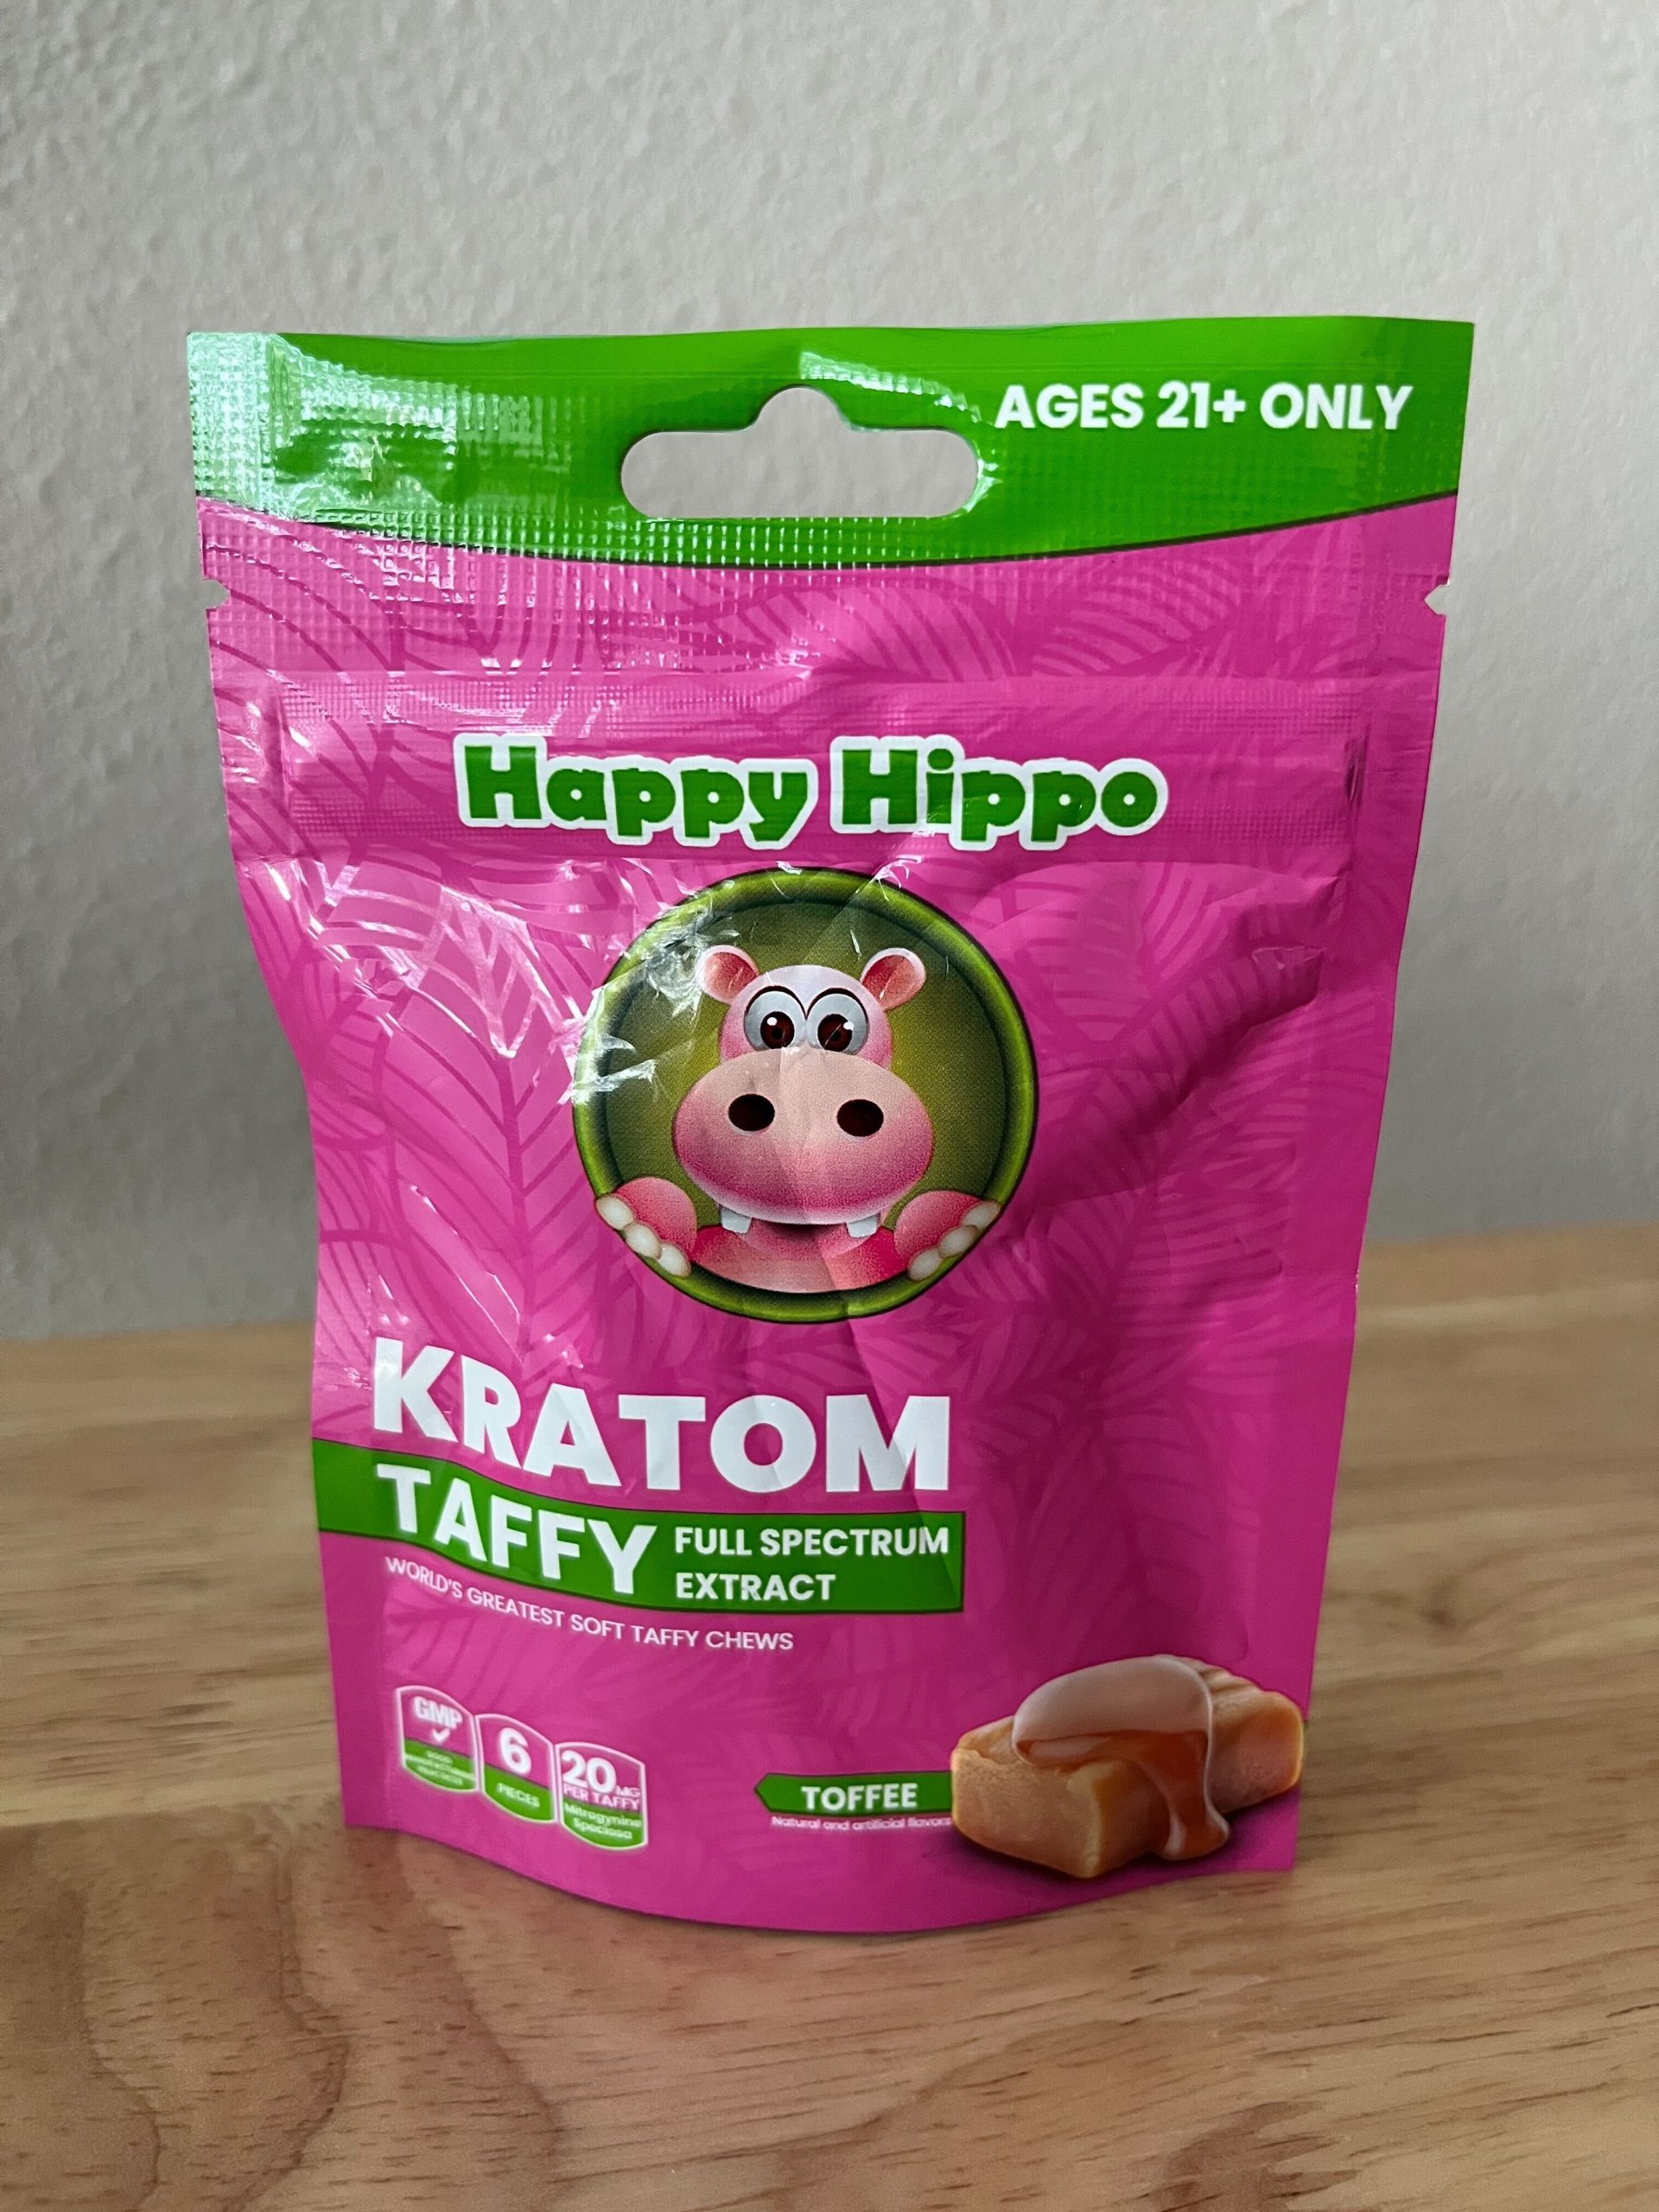 Featured image depicting a package of Happy Hippo Brand, Kratom extract (Toffee Flavored) Taffy Chews